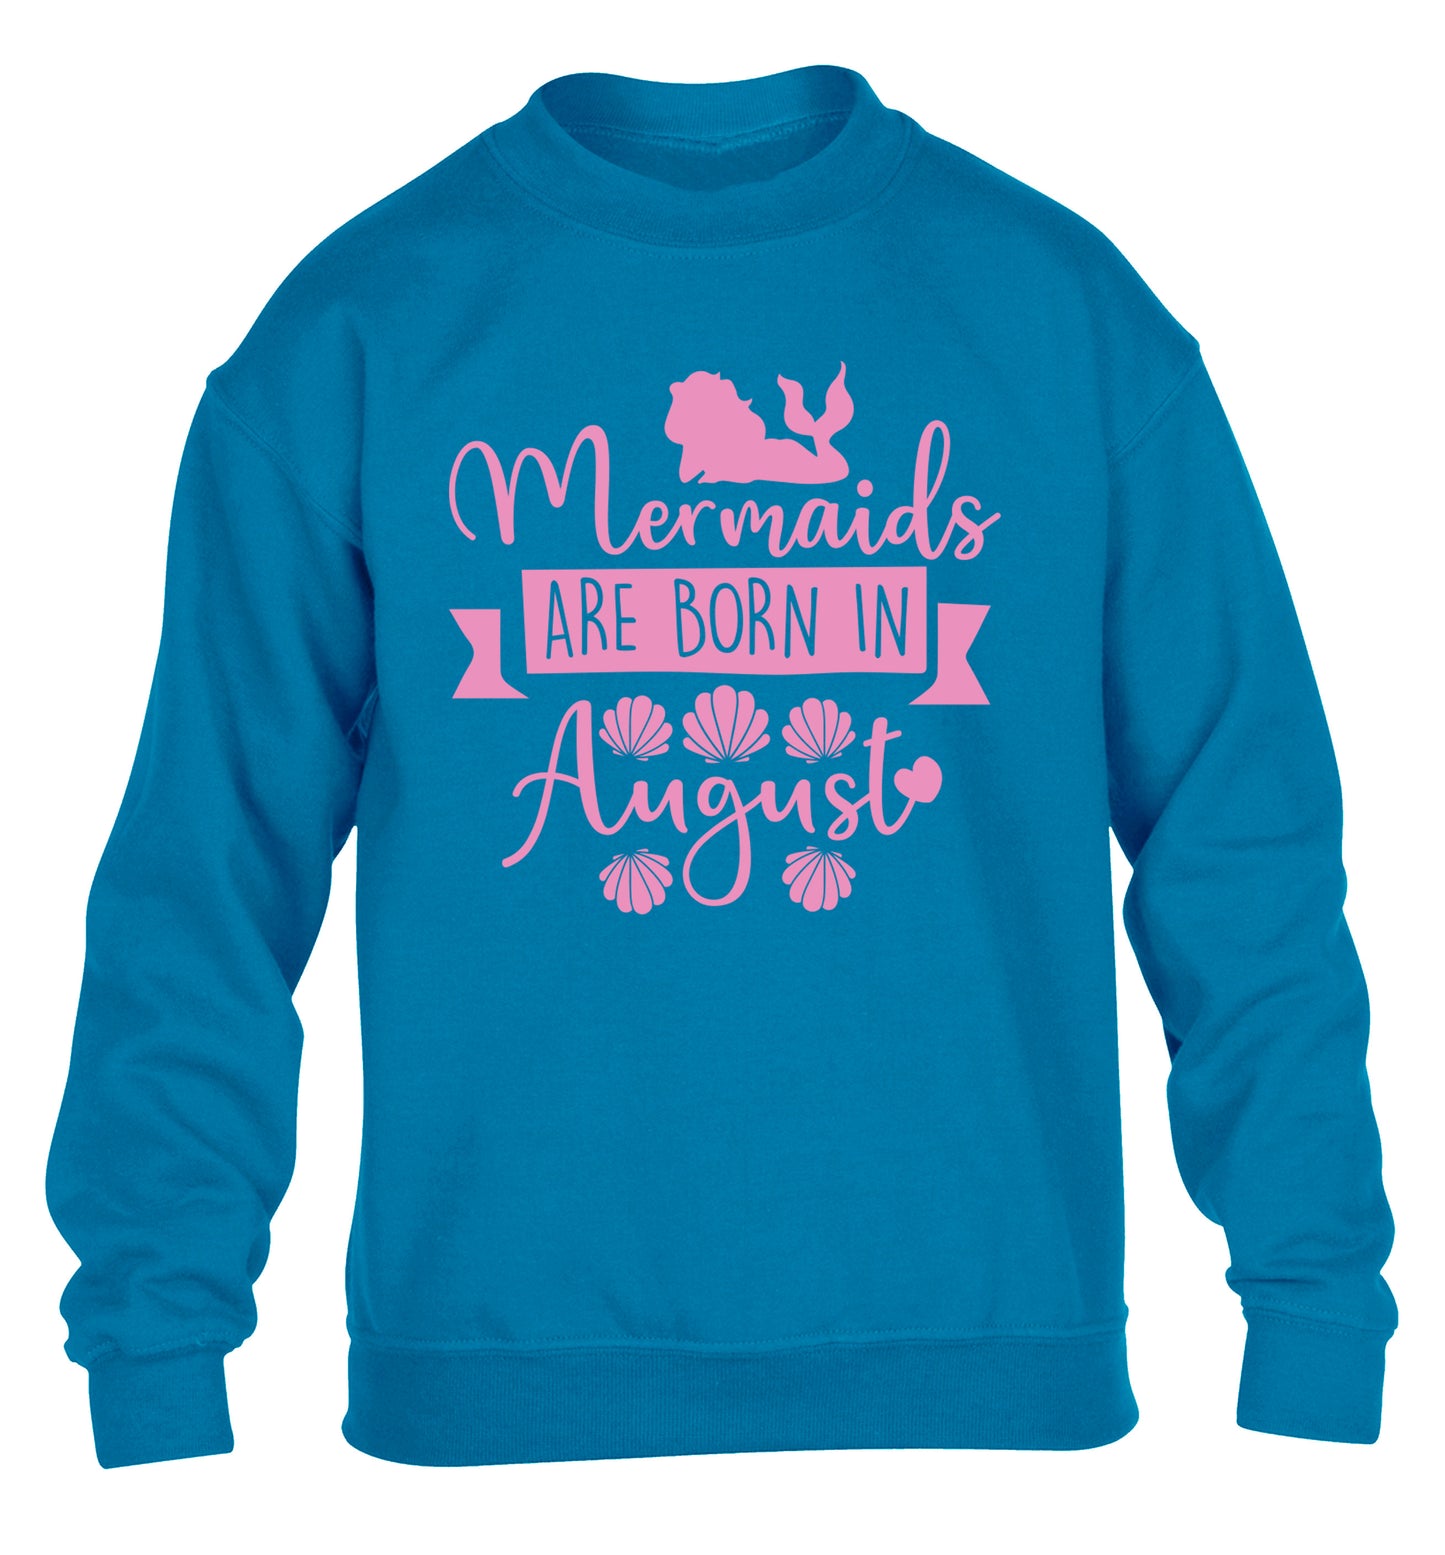 Mermaids are born in August children's blue sweater 12-13 Years